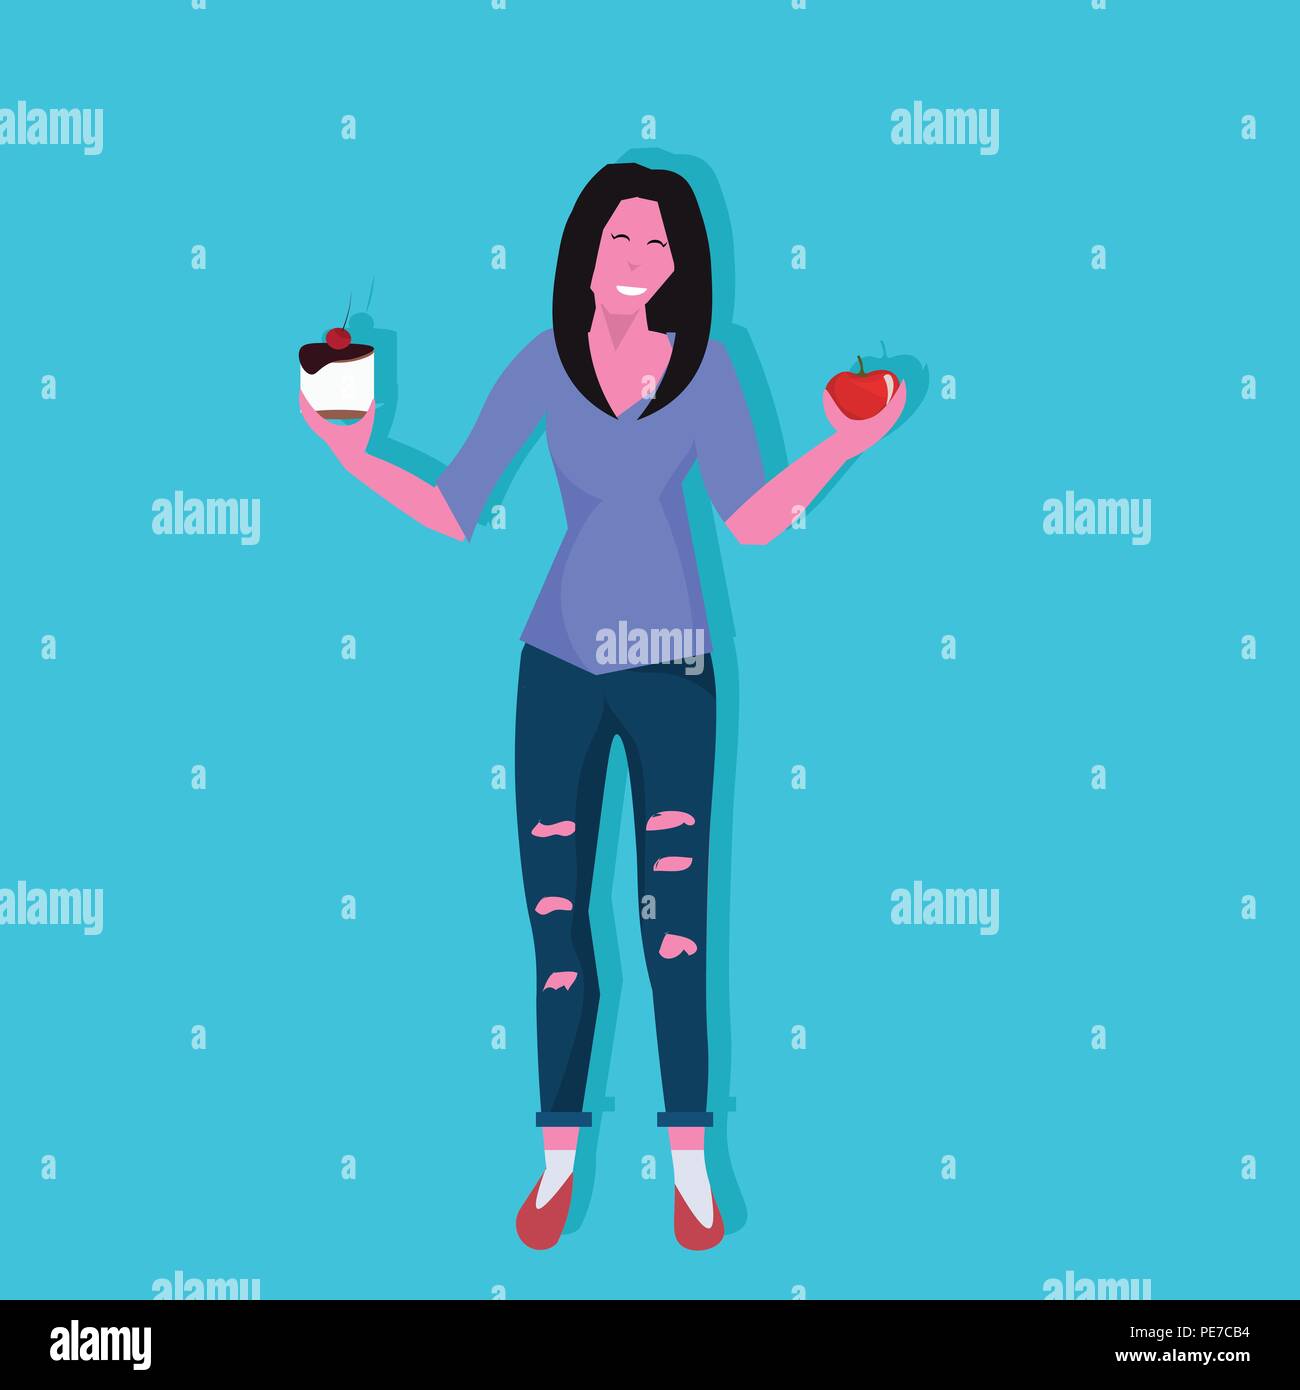 woman holding cake apple resist temptation making right dietary choice weight loss diet dilemma concept female cartoon character flat full length Stock Vector